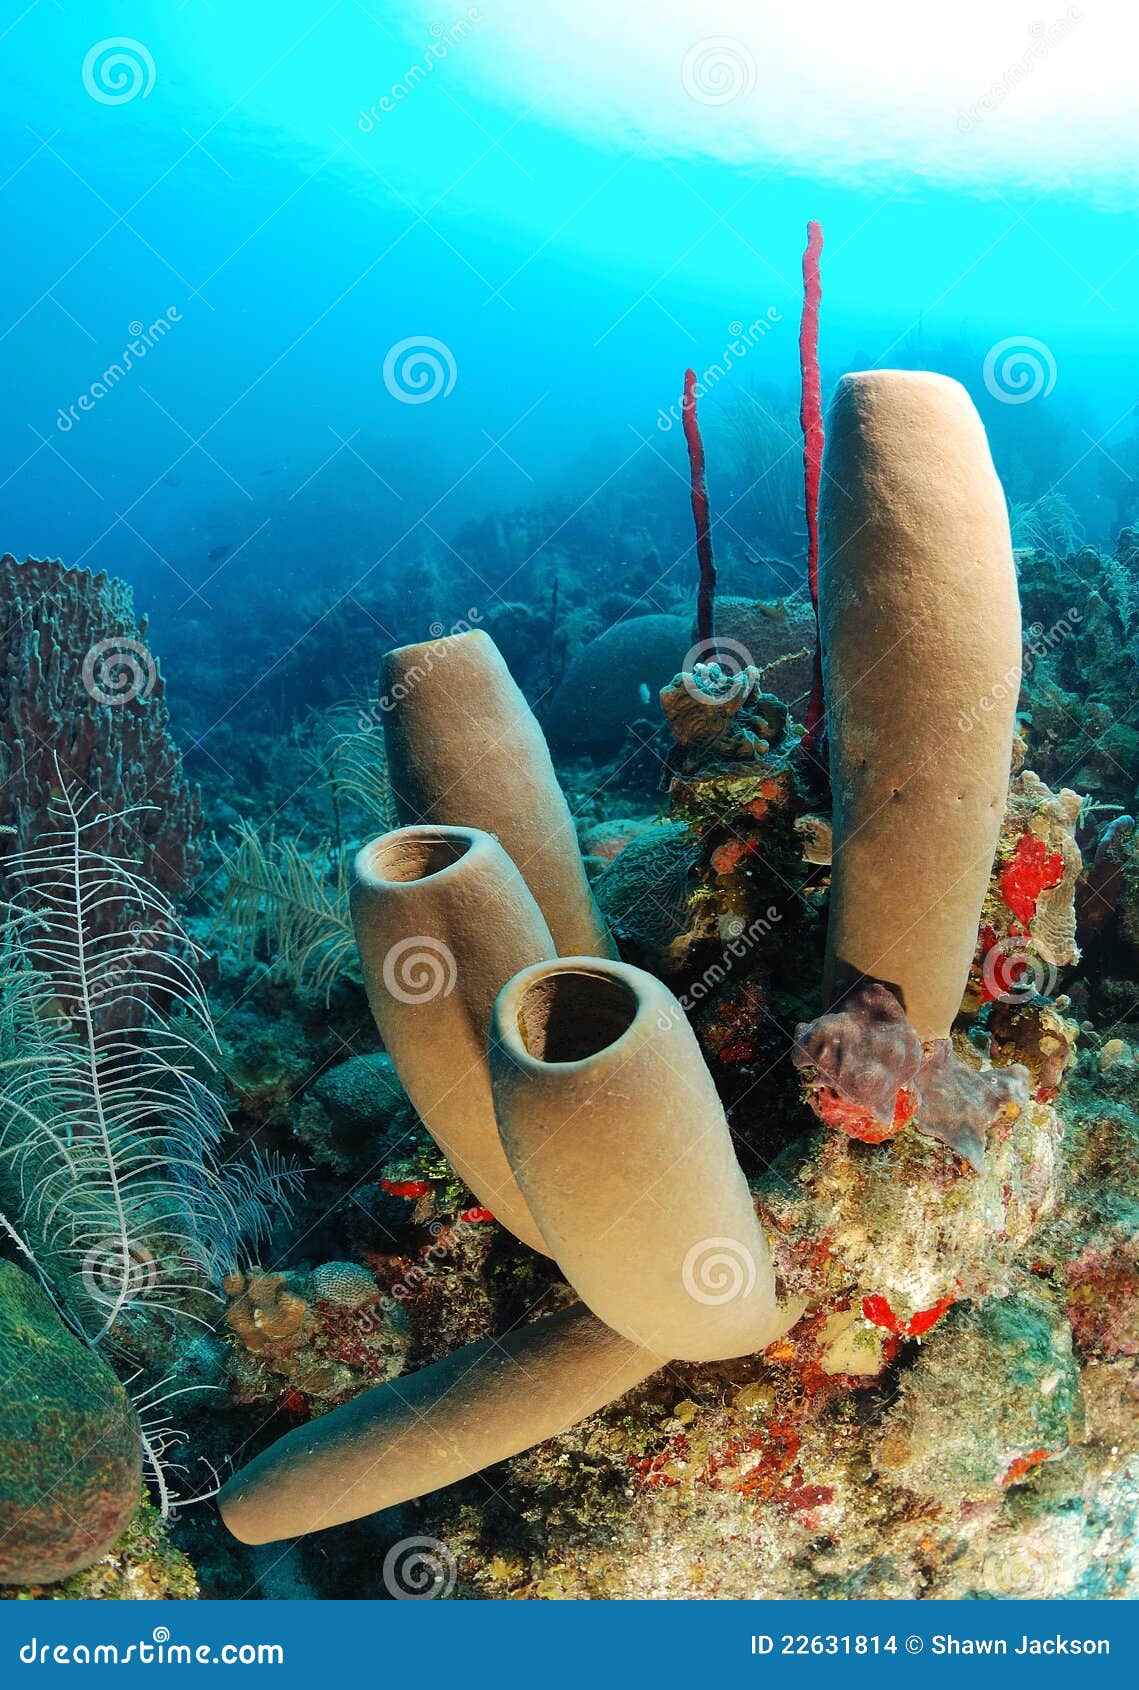 tube sponges and coral reef